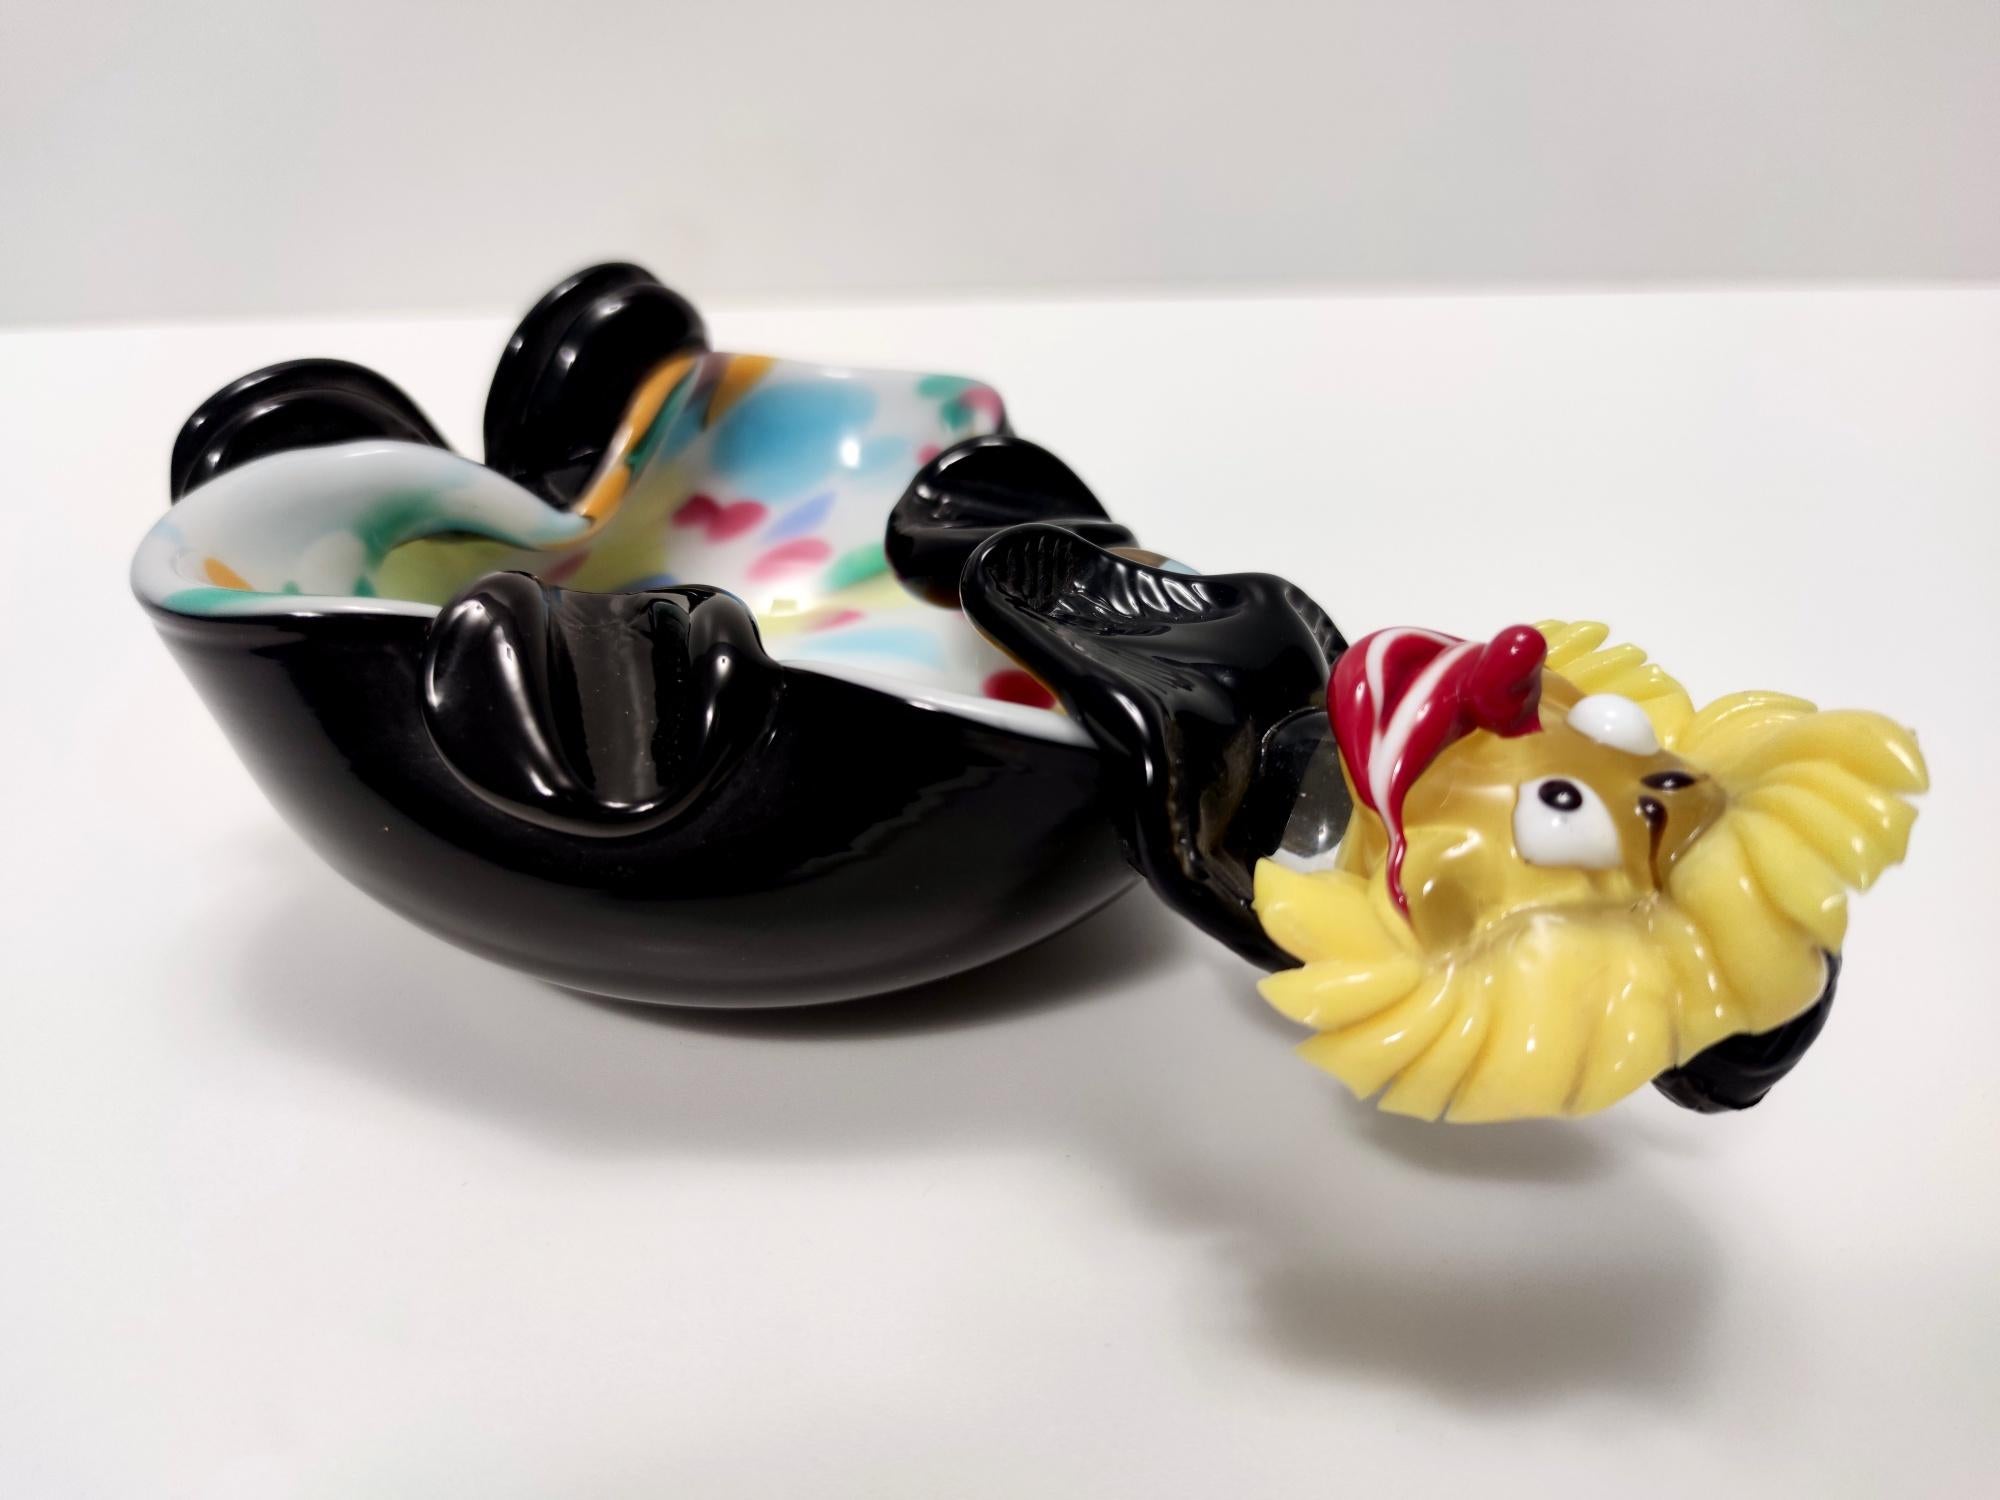 Vintage Black and Multicolored Murano Glass Clown Trinket Bowl / Ashtray, Italy In Good Condition For Sale In Bresso, Lombardy